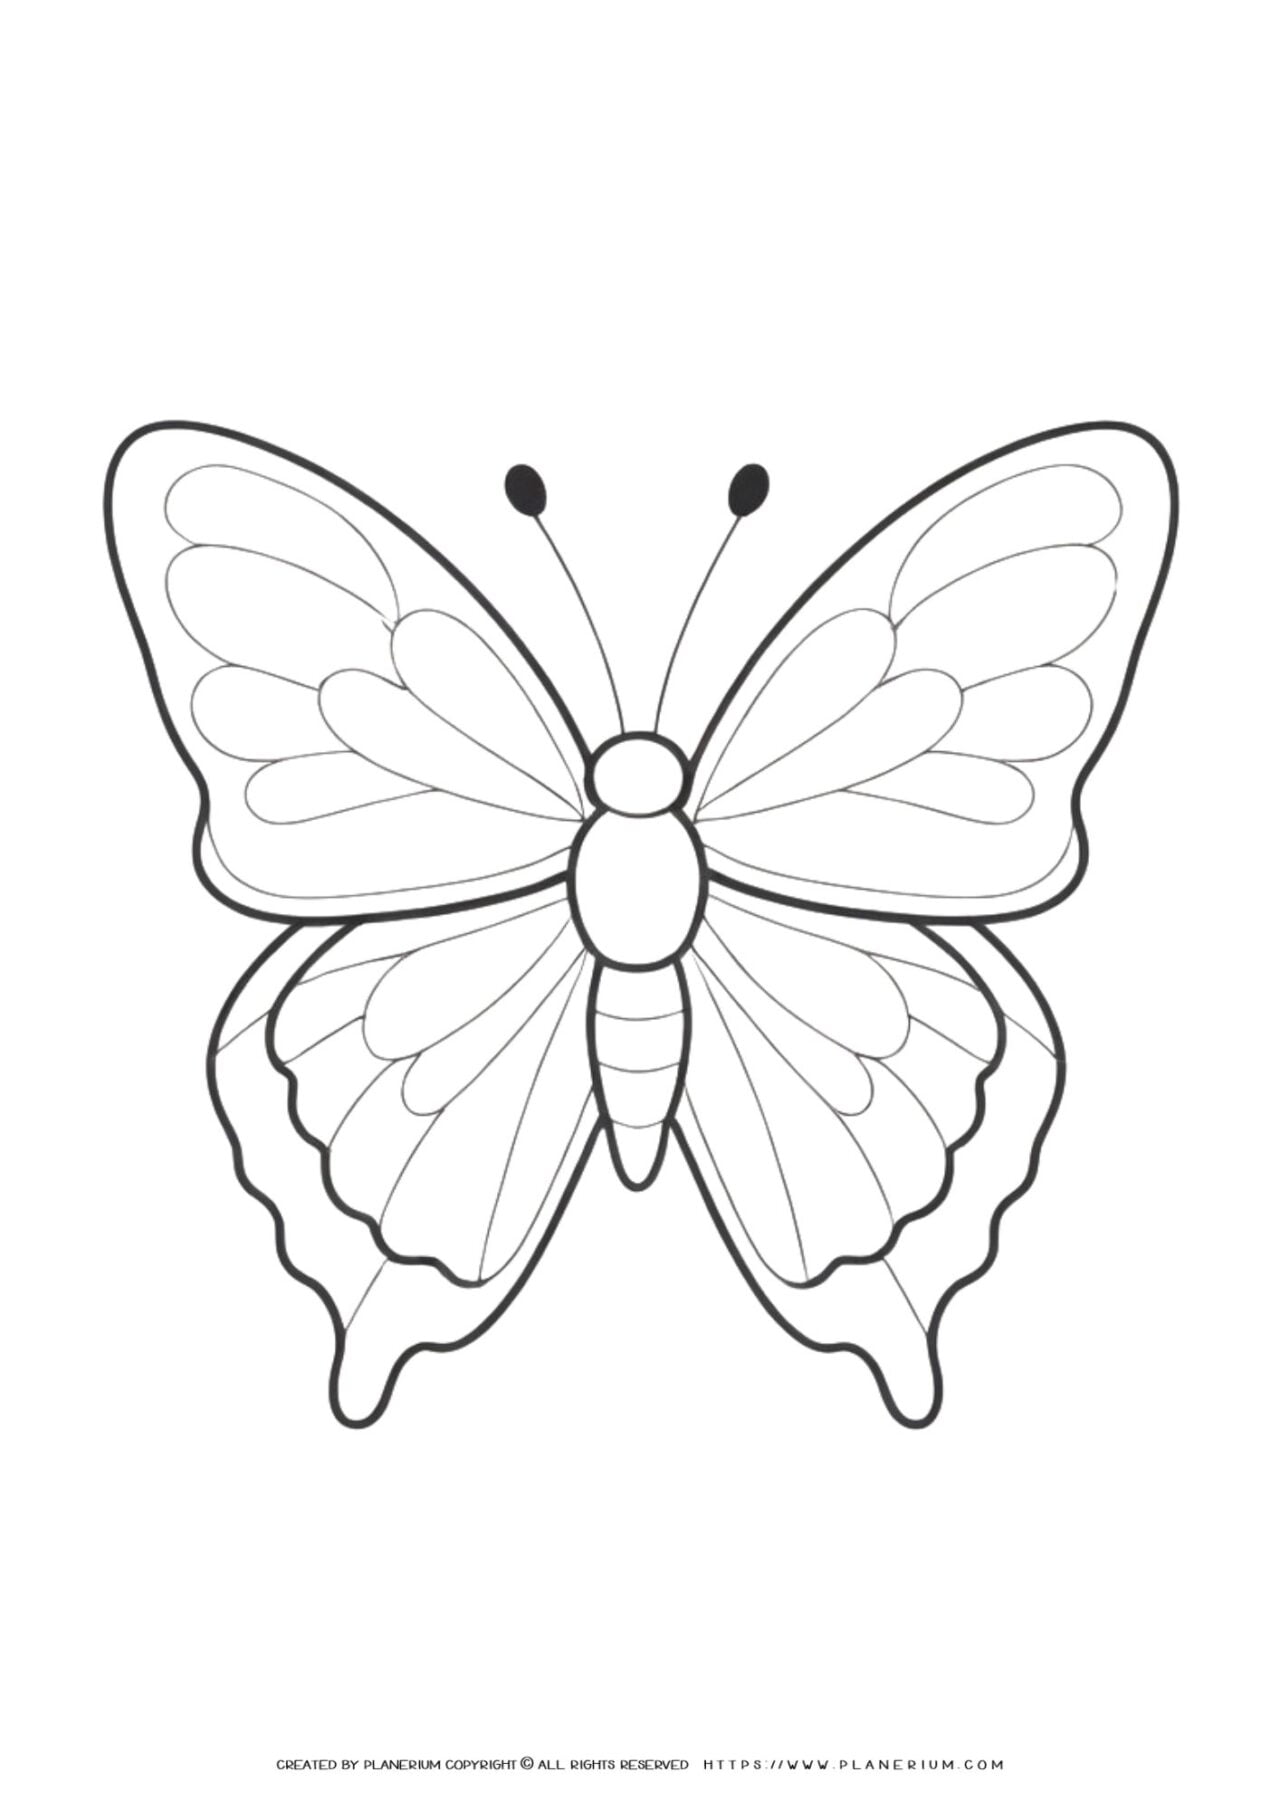 Butterfly coloring page illustration.